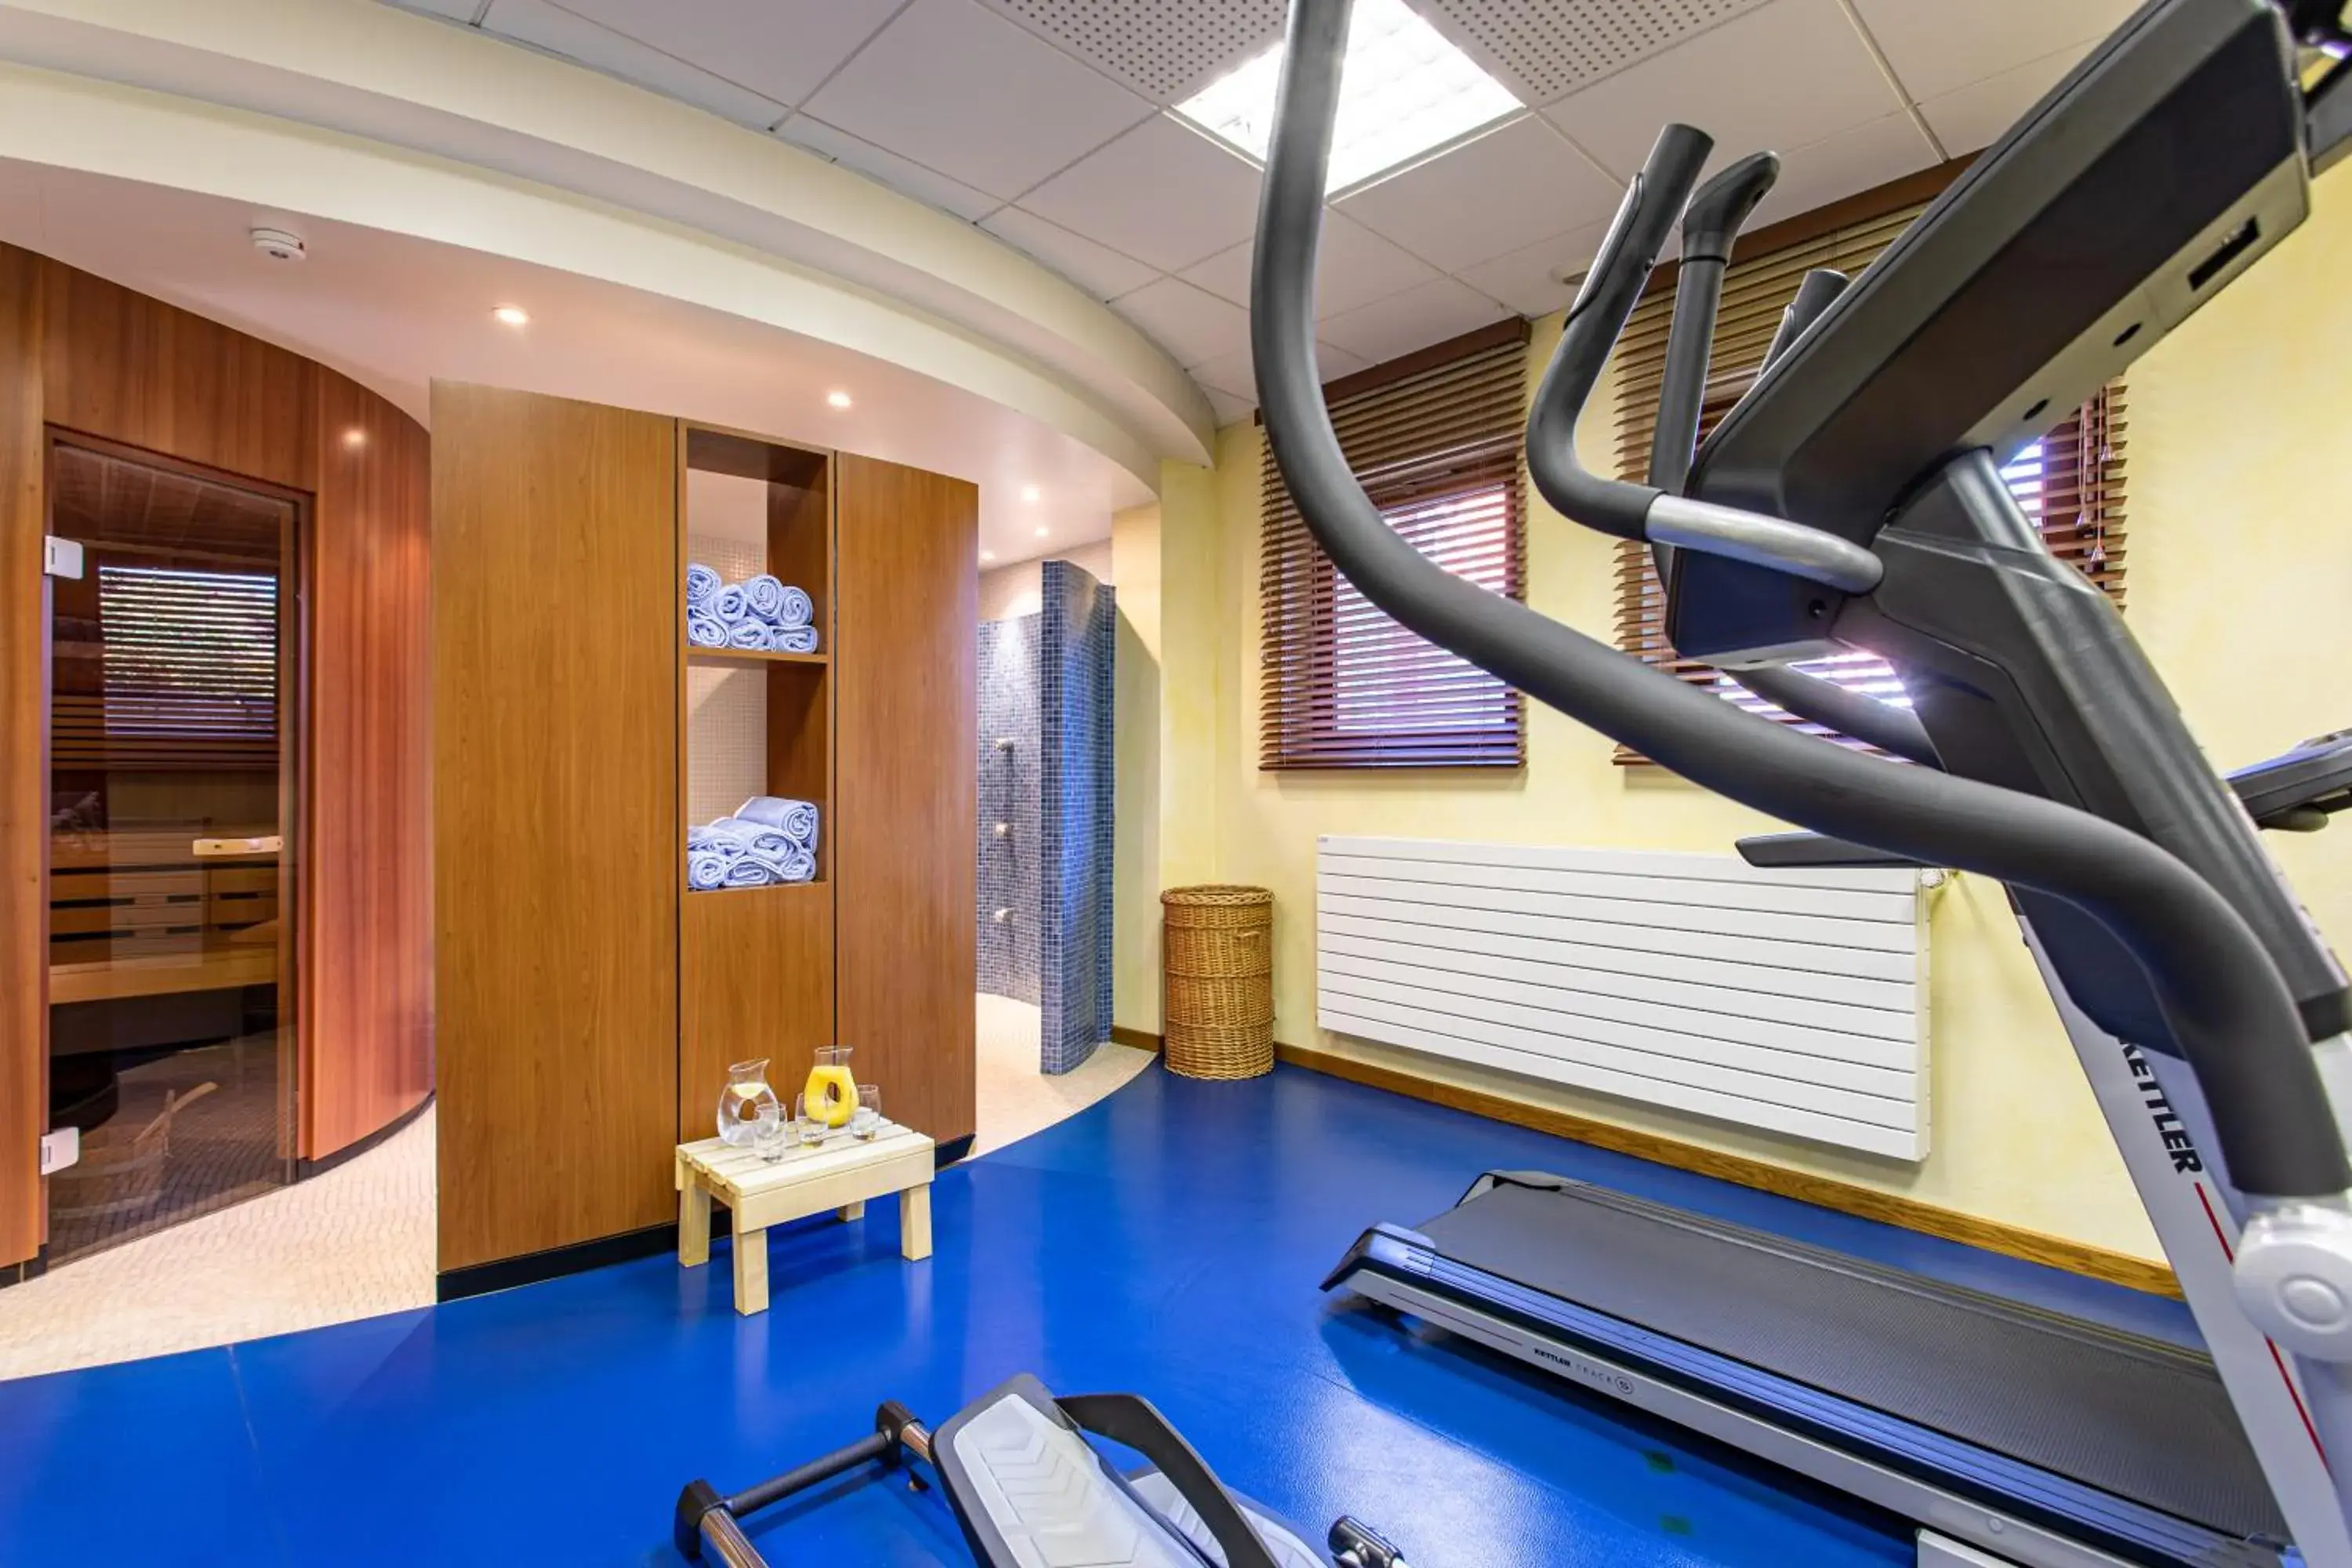 Fitness centre/facilities, Fitness Center/Facilities in L'Abbaye d'Alspach